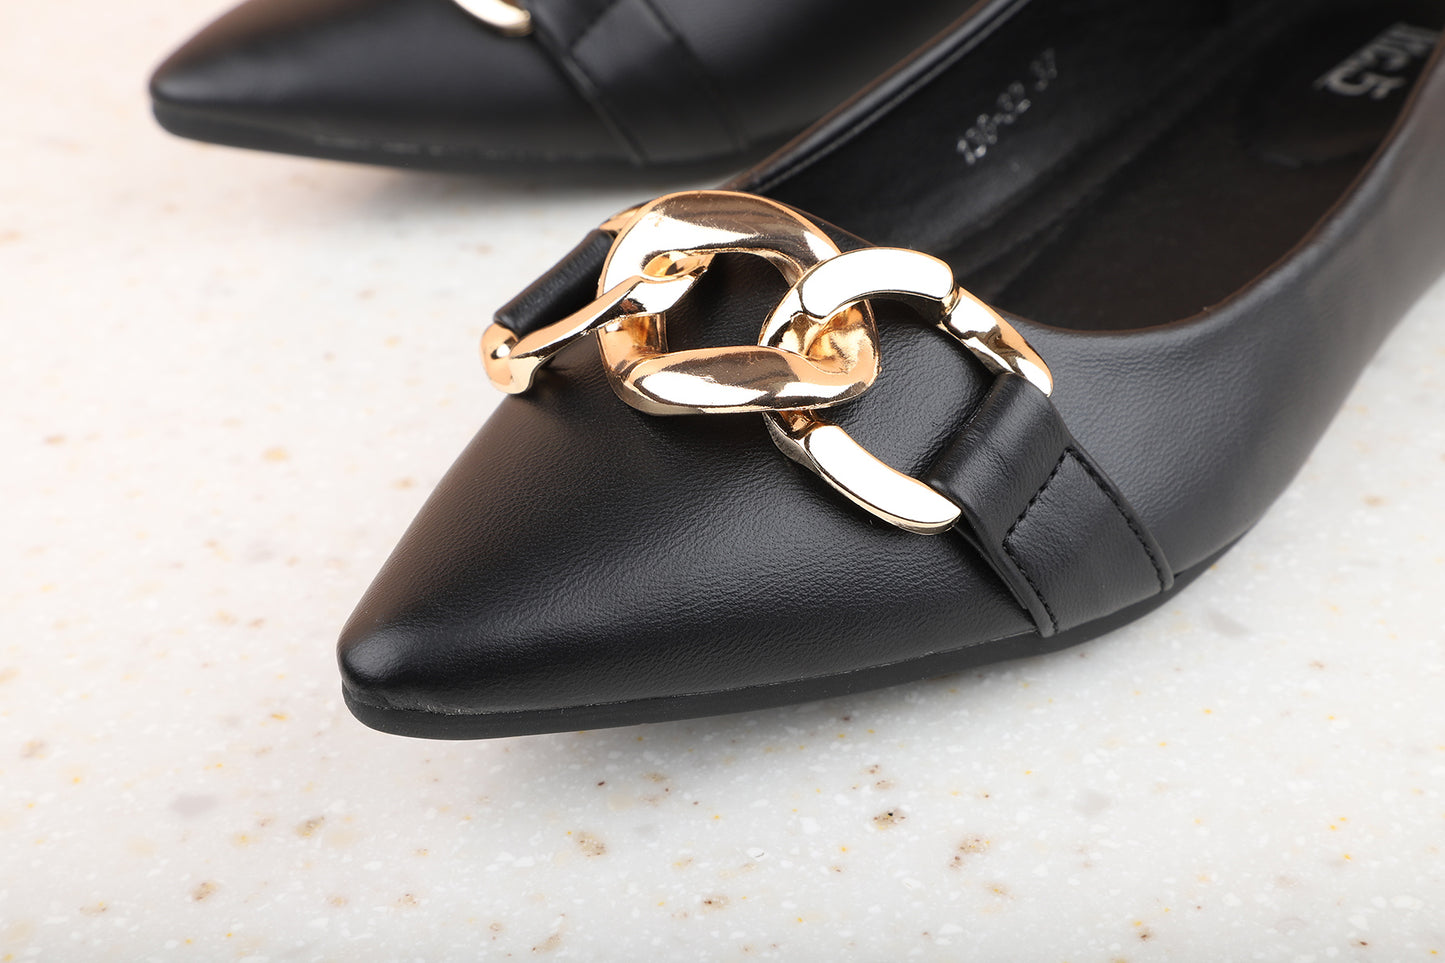 Women Black Solid Ballerinas with Buckle Detail